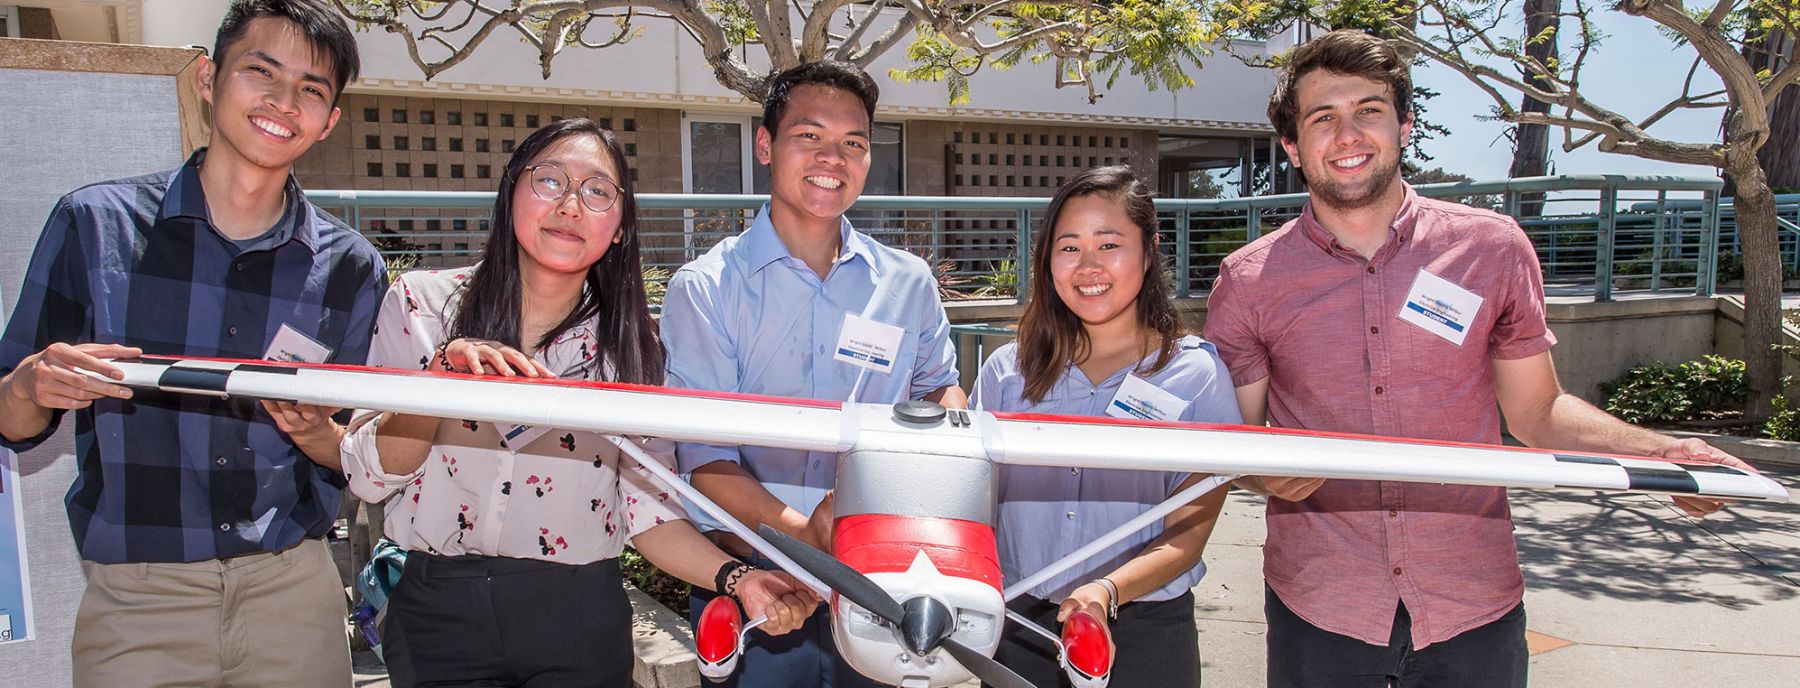 photo of students with model airplane project